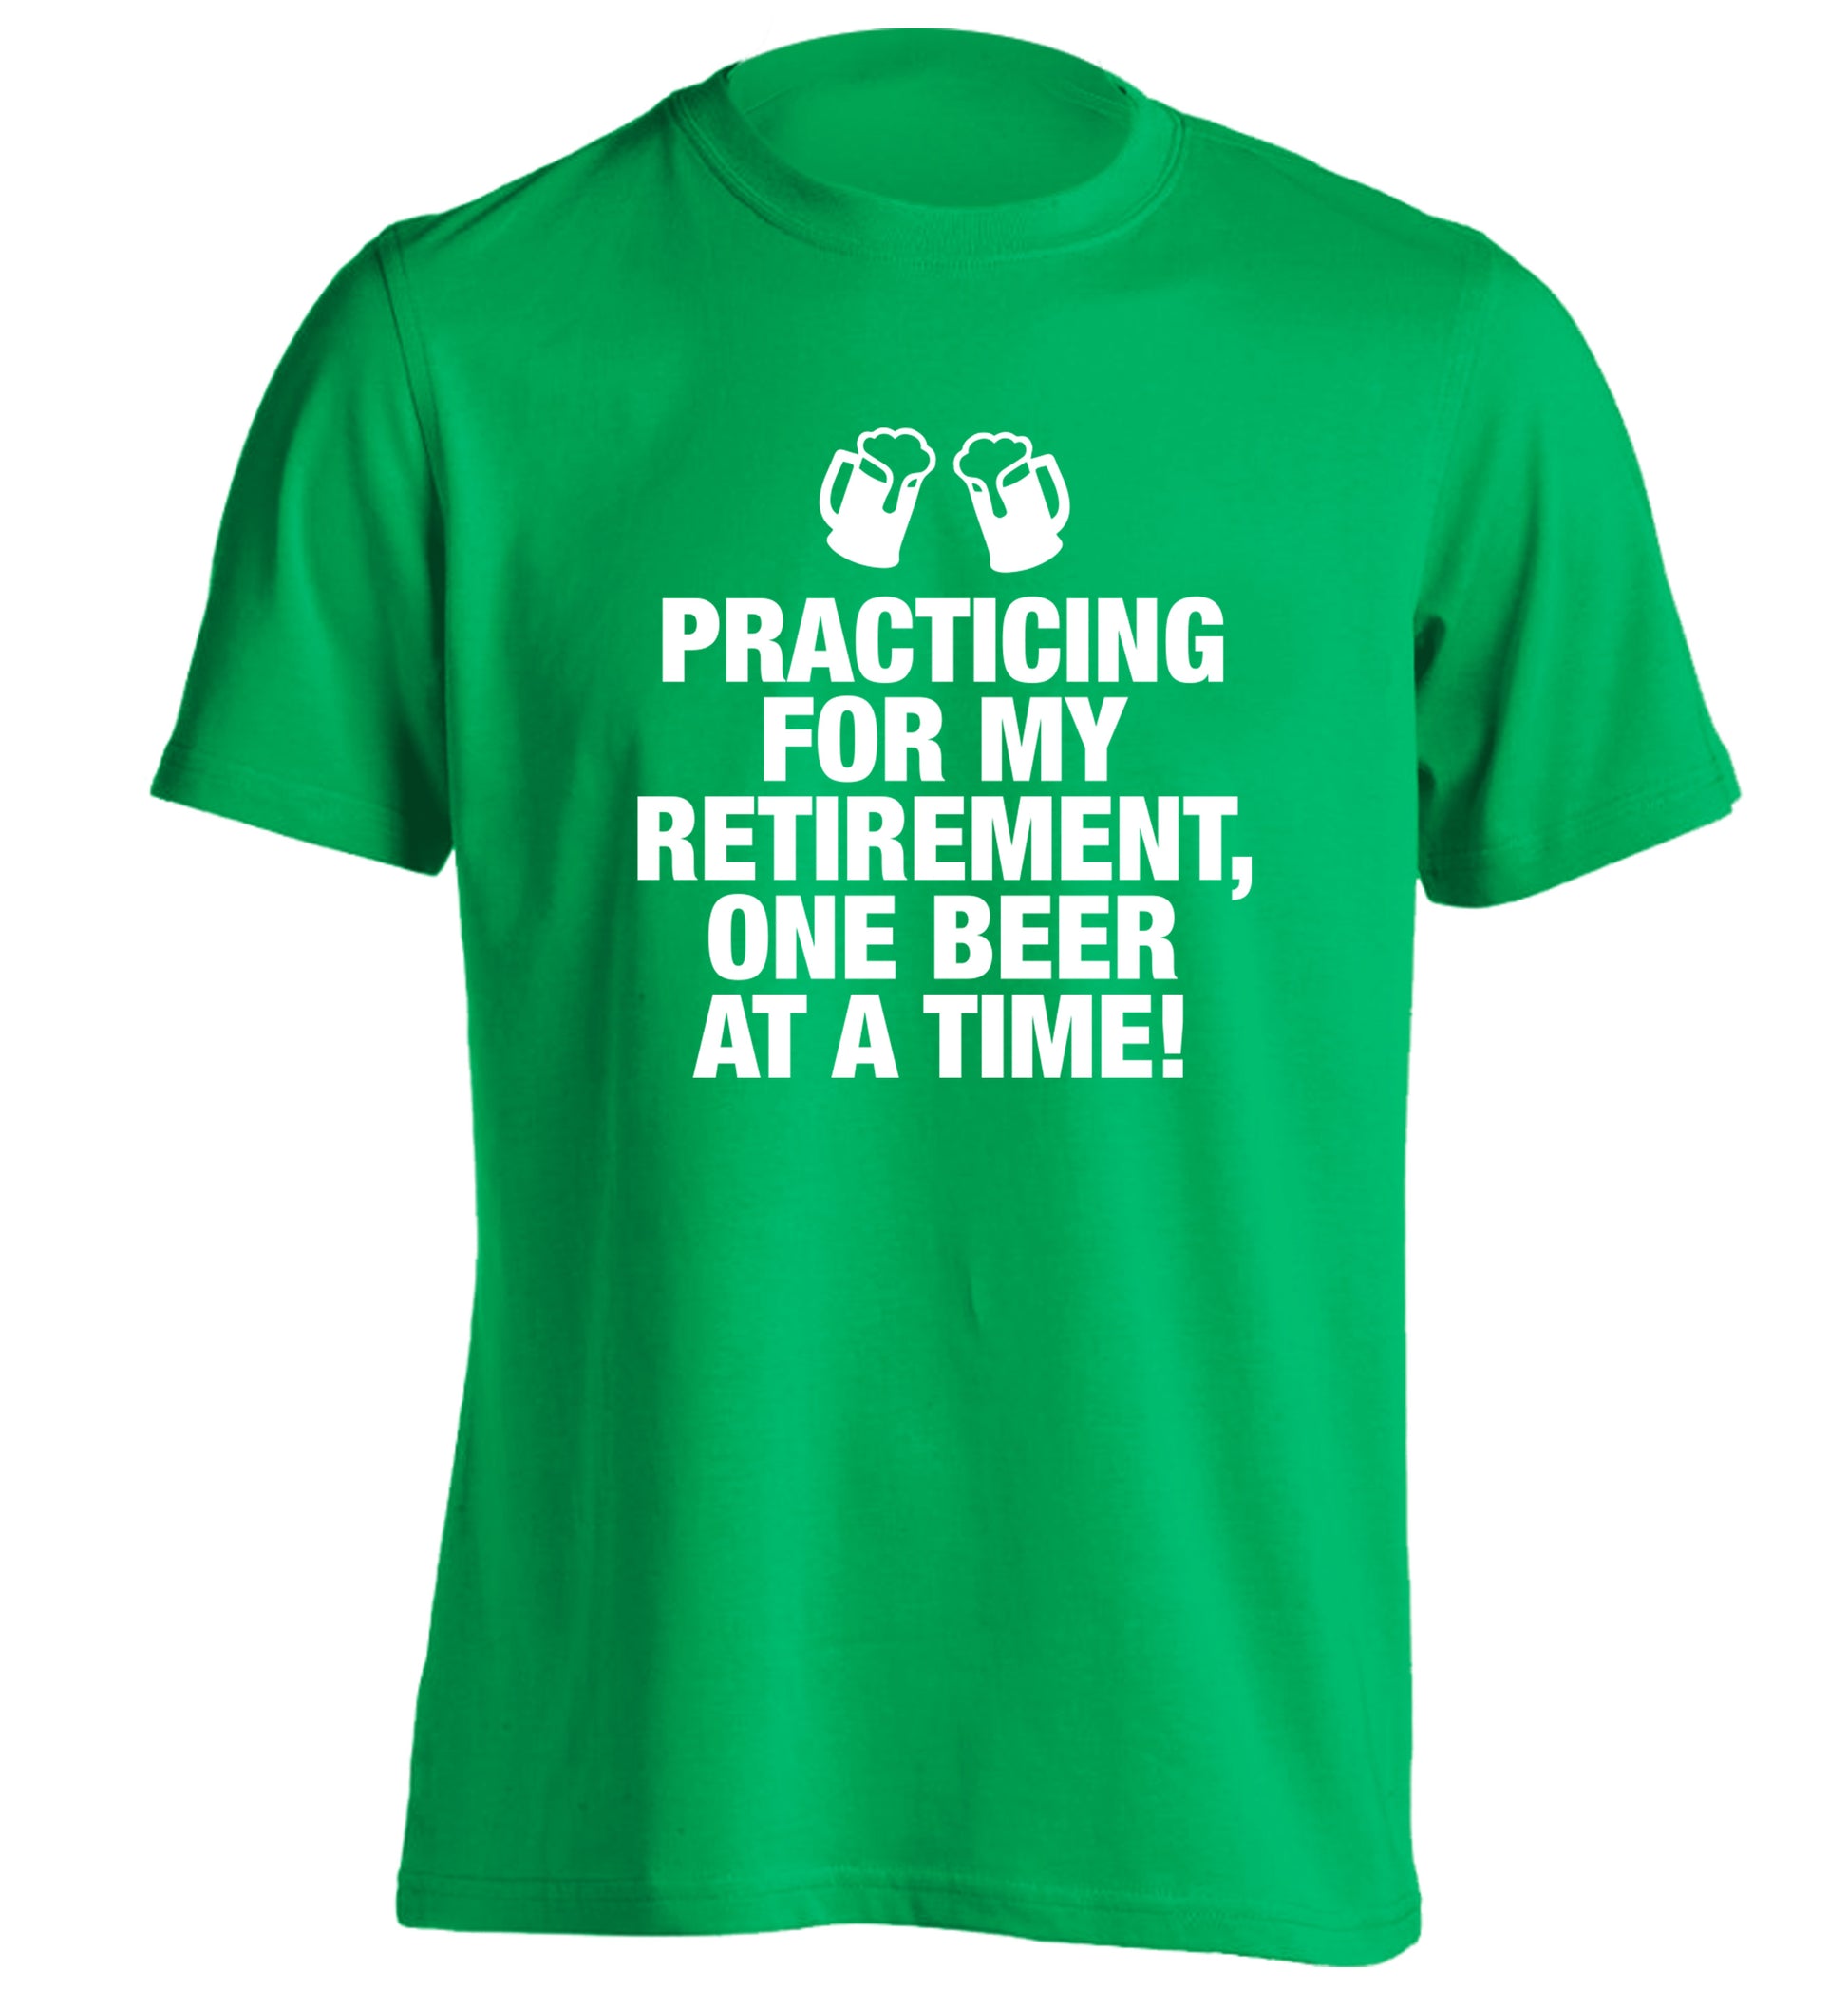 Practicing my retirement one beer at a time adults unisex green Tshirt 2XL